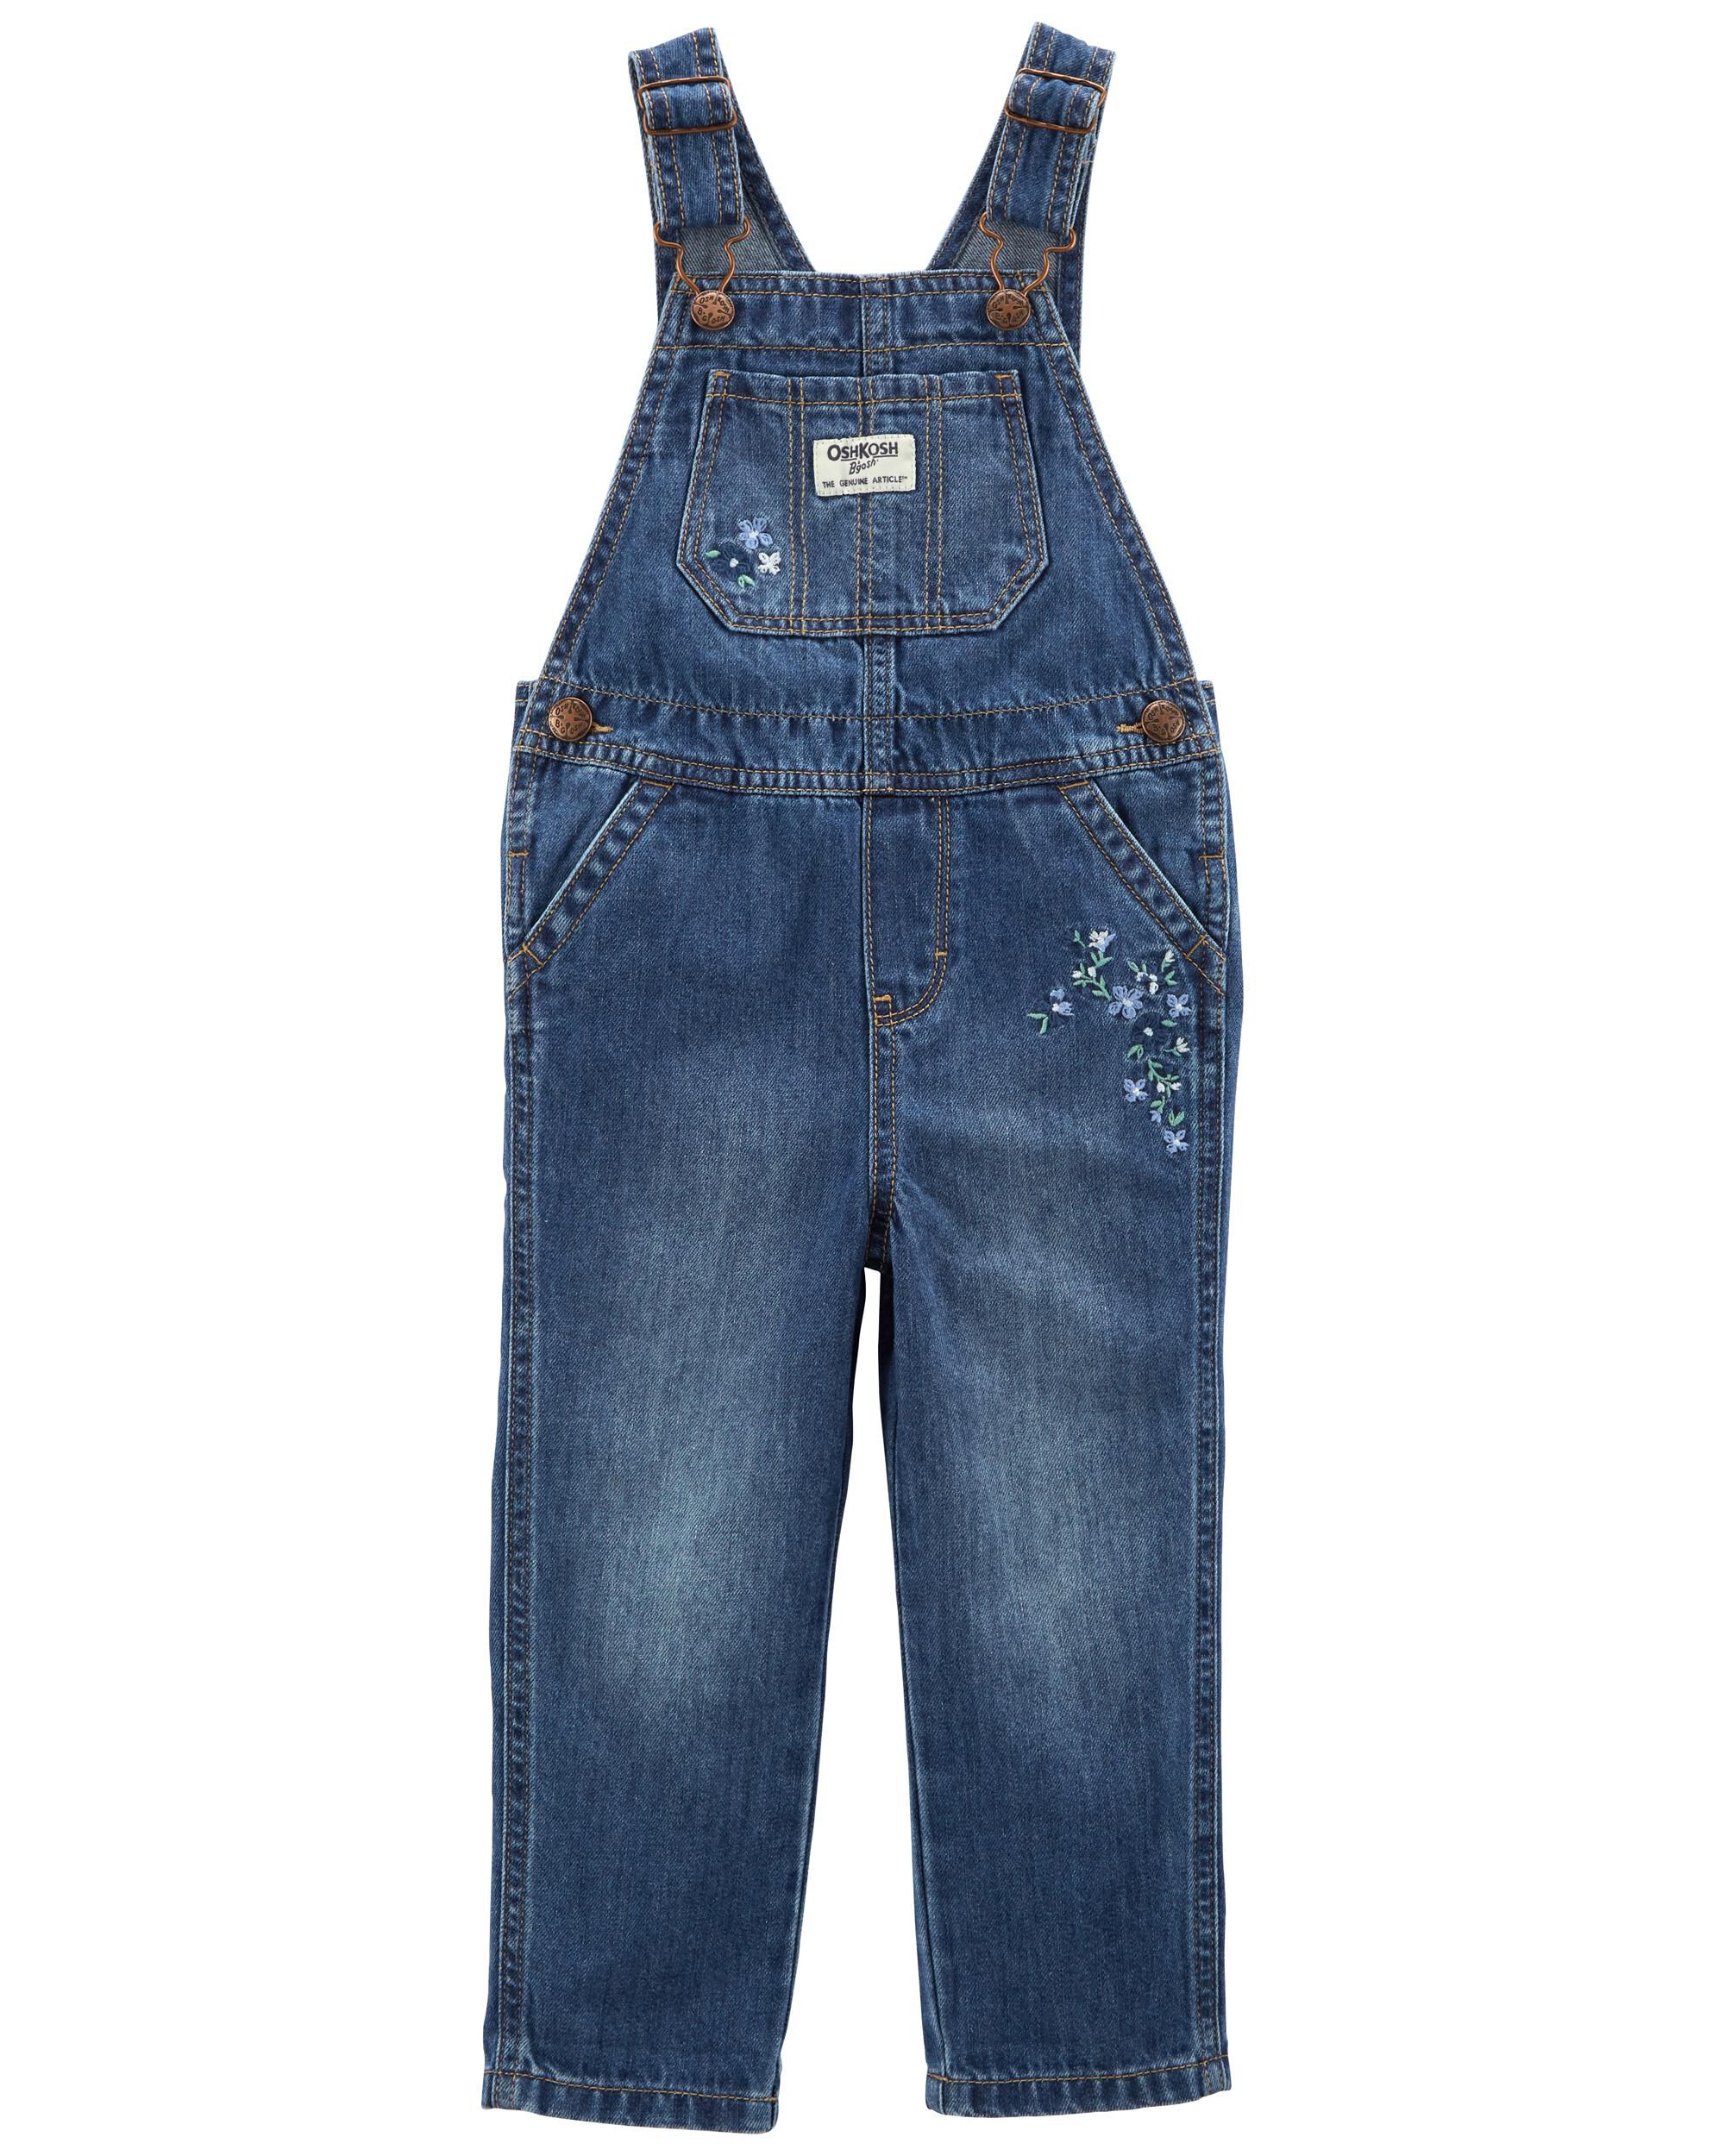 Carters Baby Denim Floral Embroidery Overalls